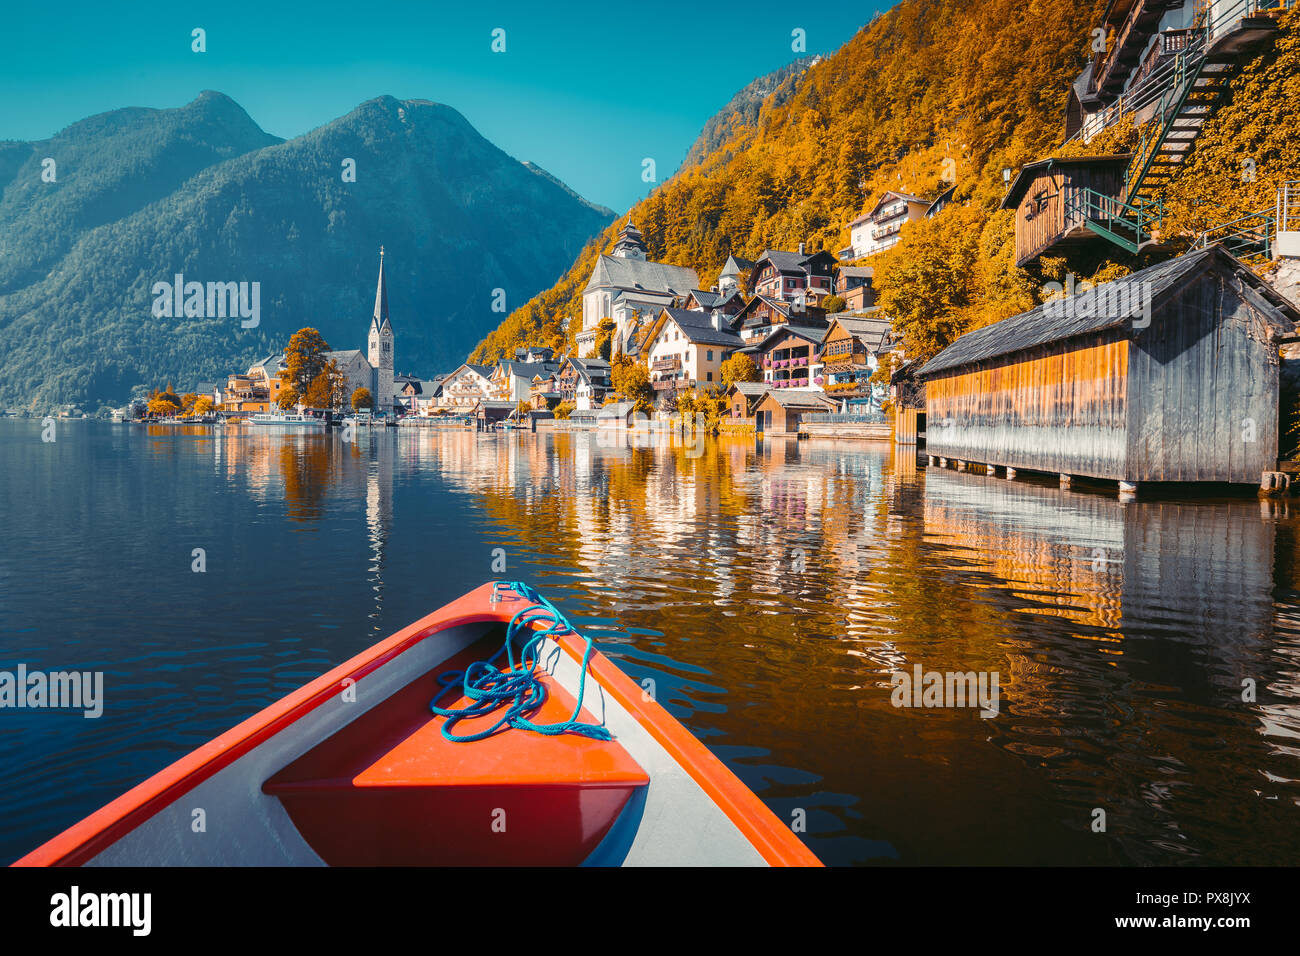 Classic view of famous Hallstatt lakeside town with  traditional rowing boat in Teal and Orange look, Austria Stock Photo